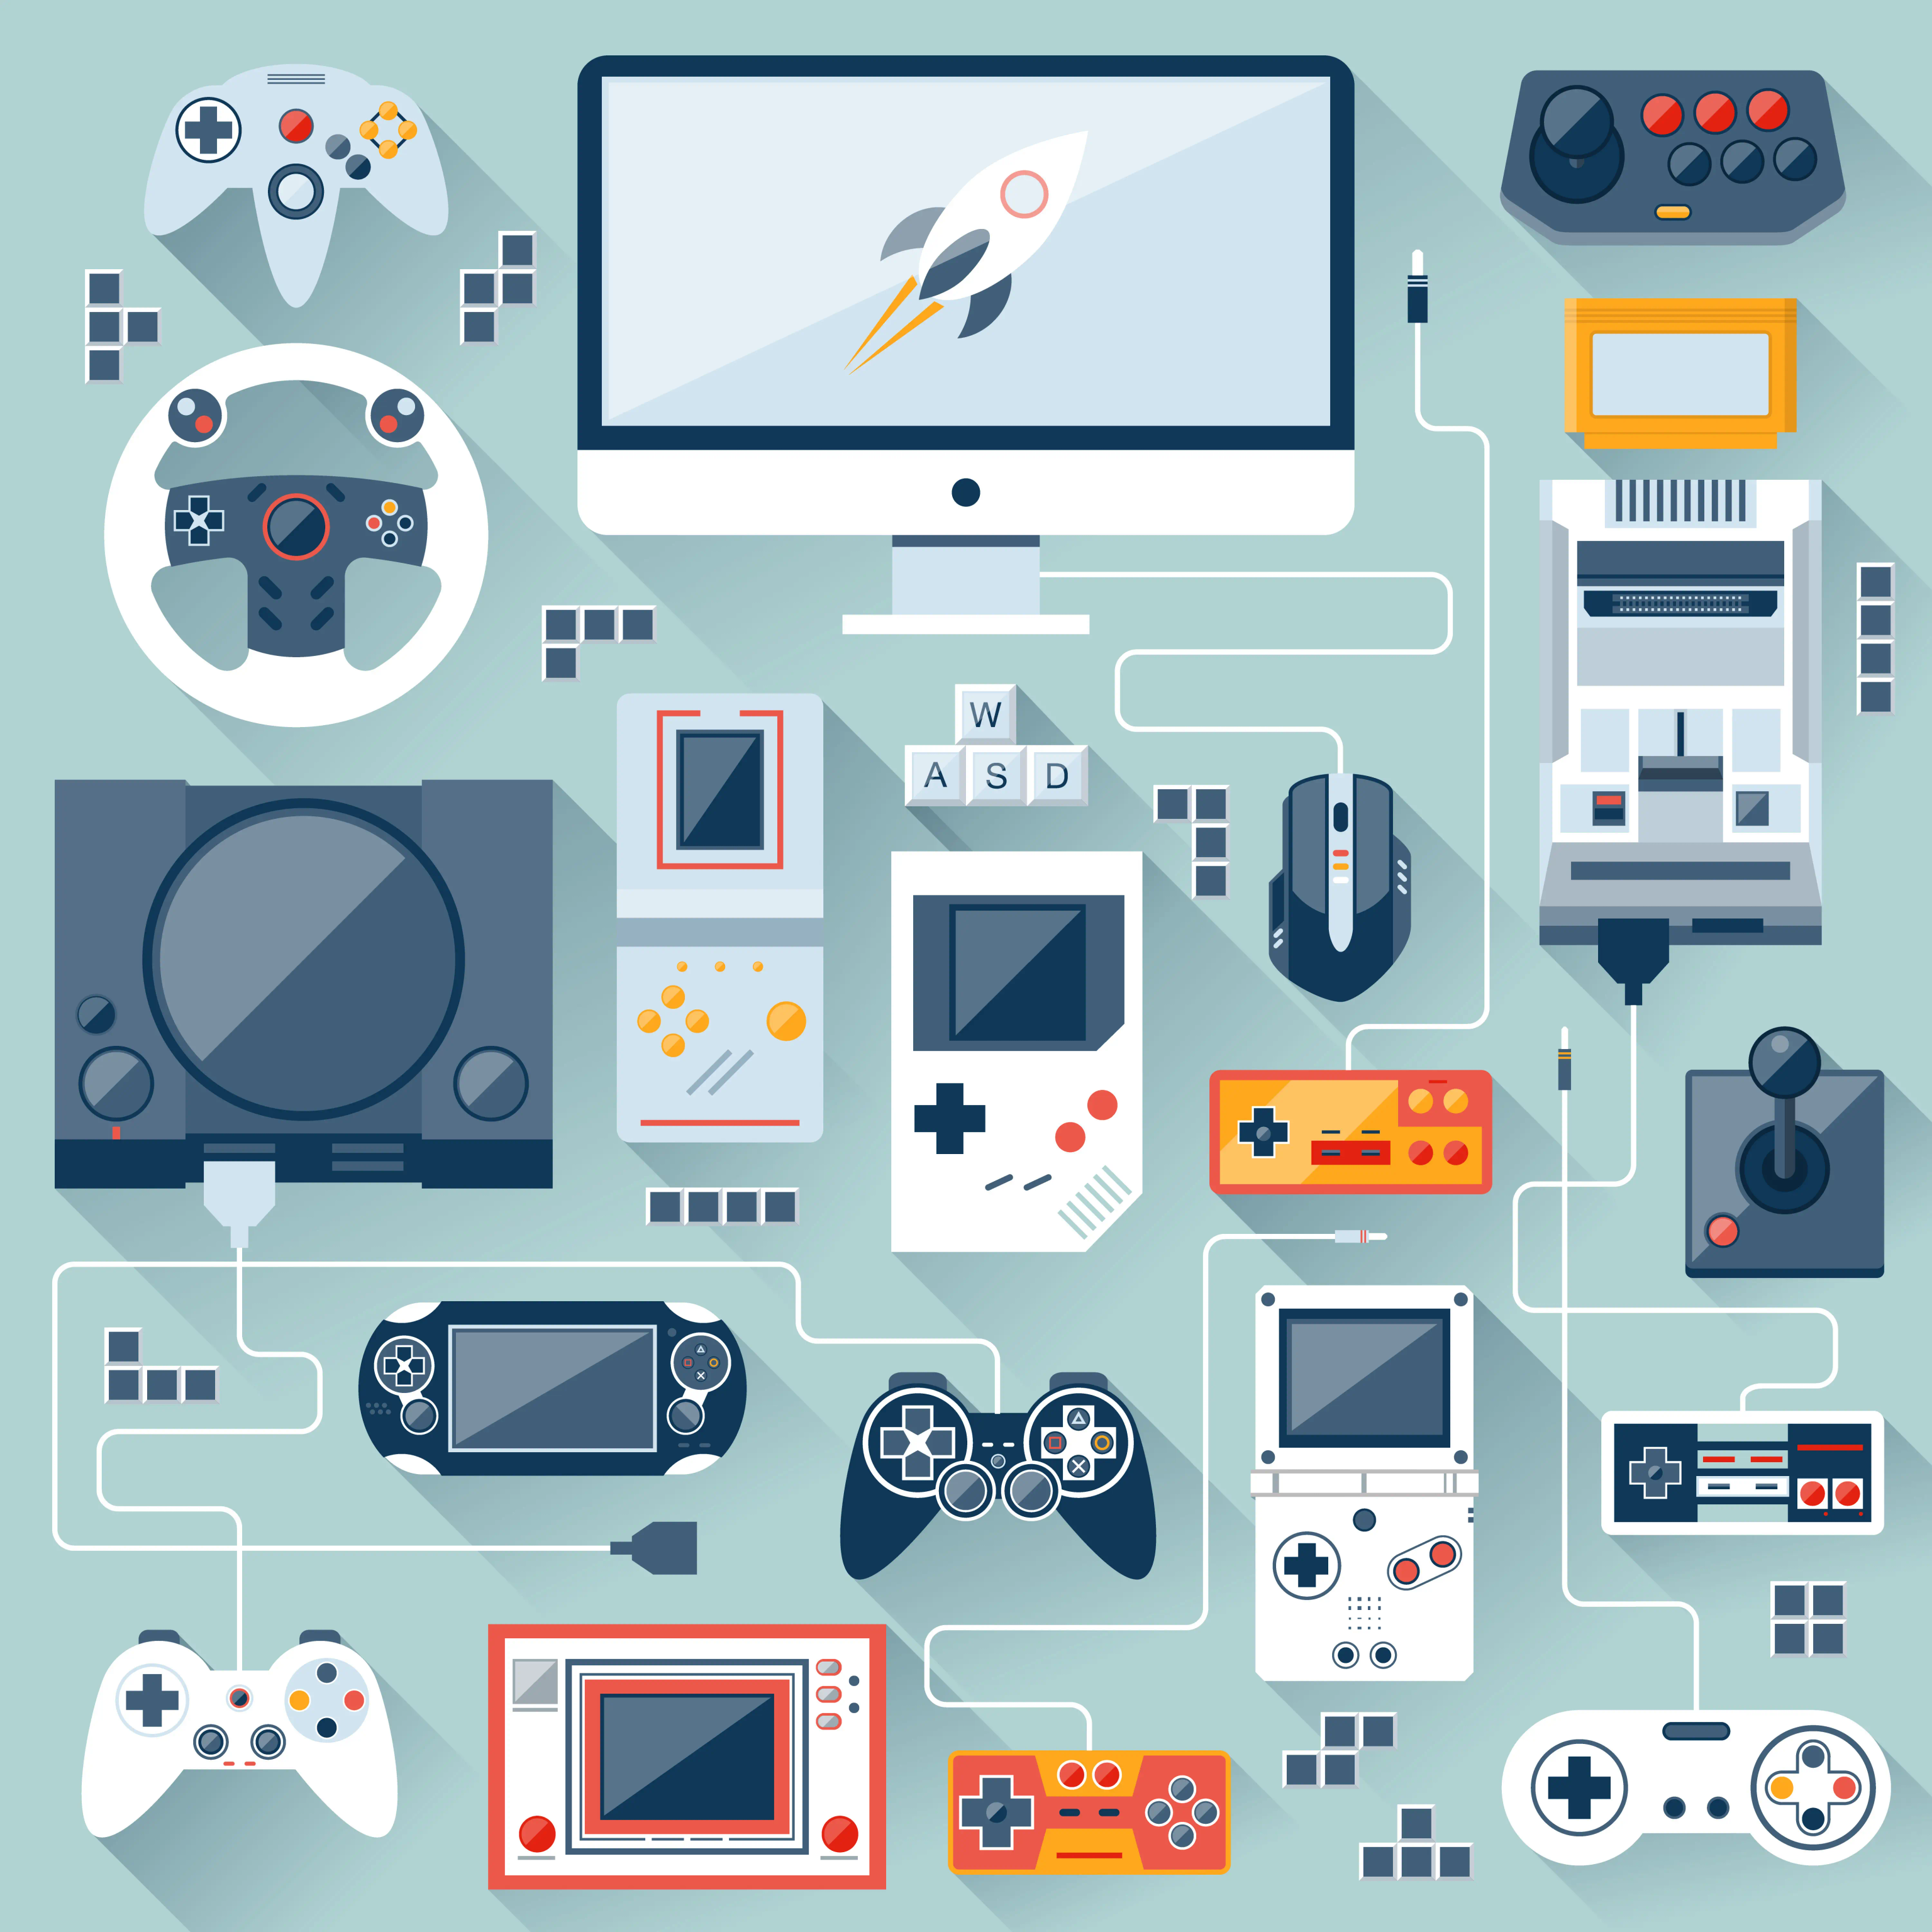 a picture showing how far along technology has come displaying modern tech gadgets, computer gaming consoles, console peripherals, other technical computer gadgets